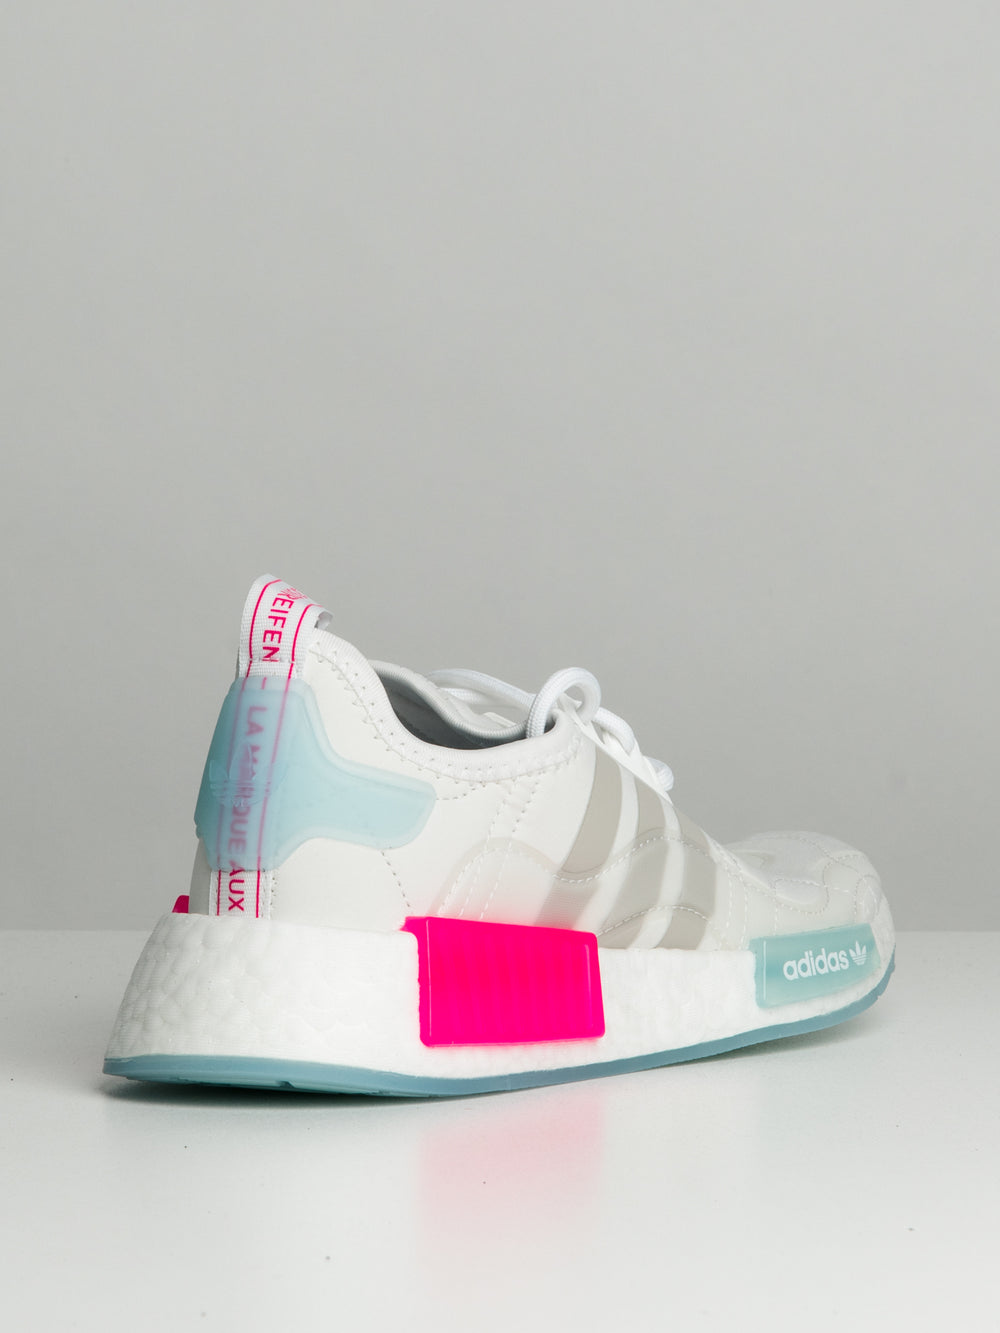 WOMENS ADIDAS NMD_R1 SNEAKERS - CLEARANCE